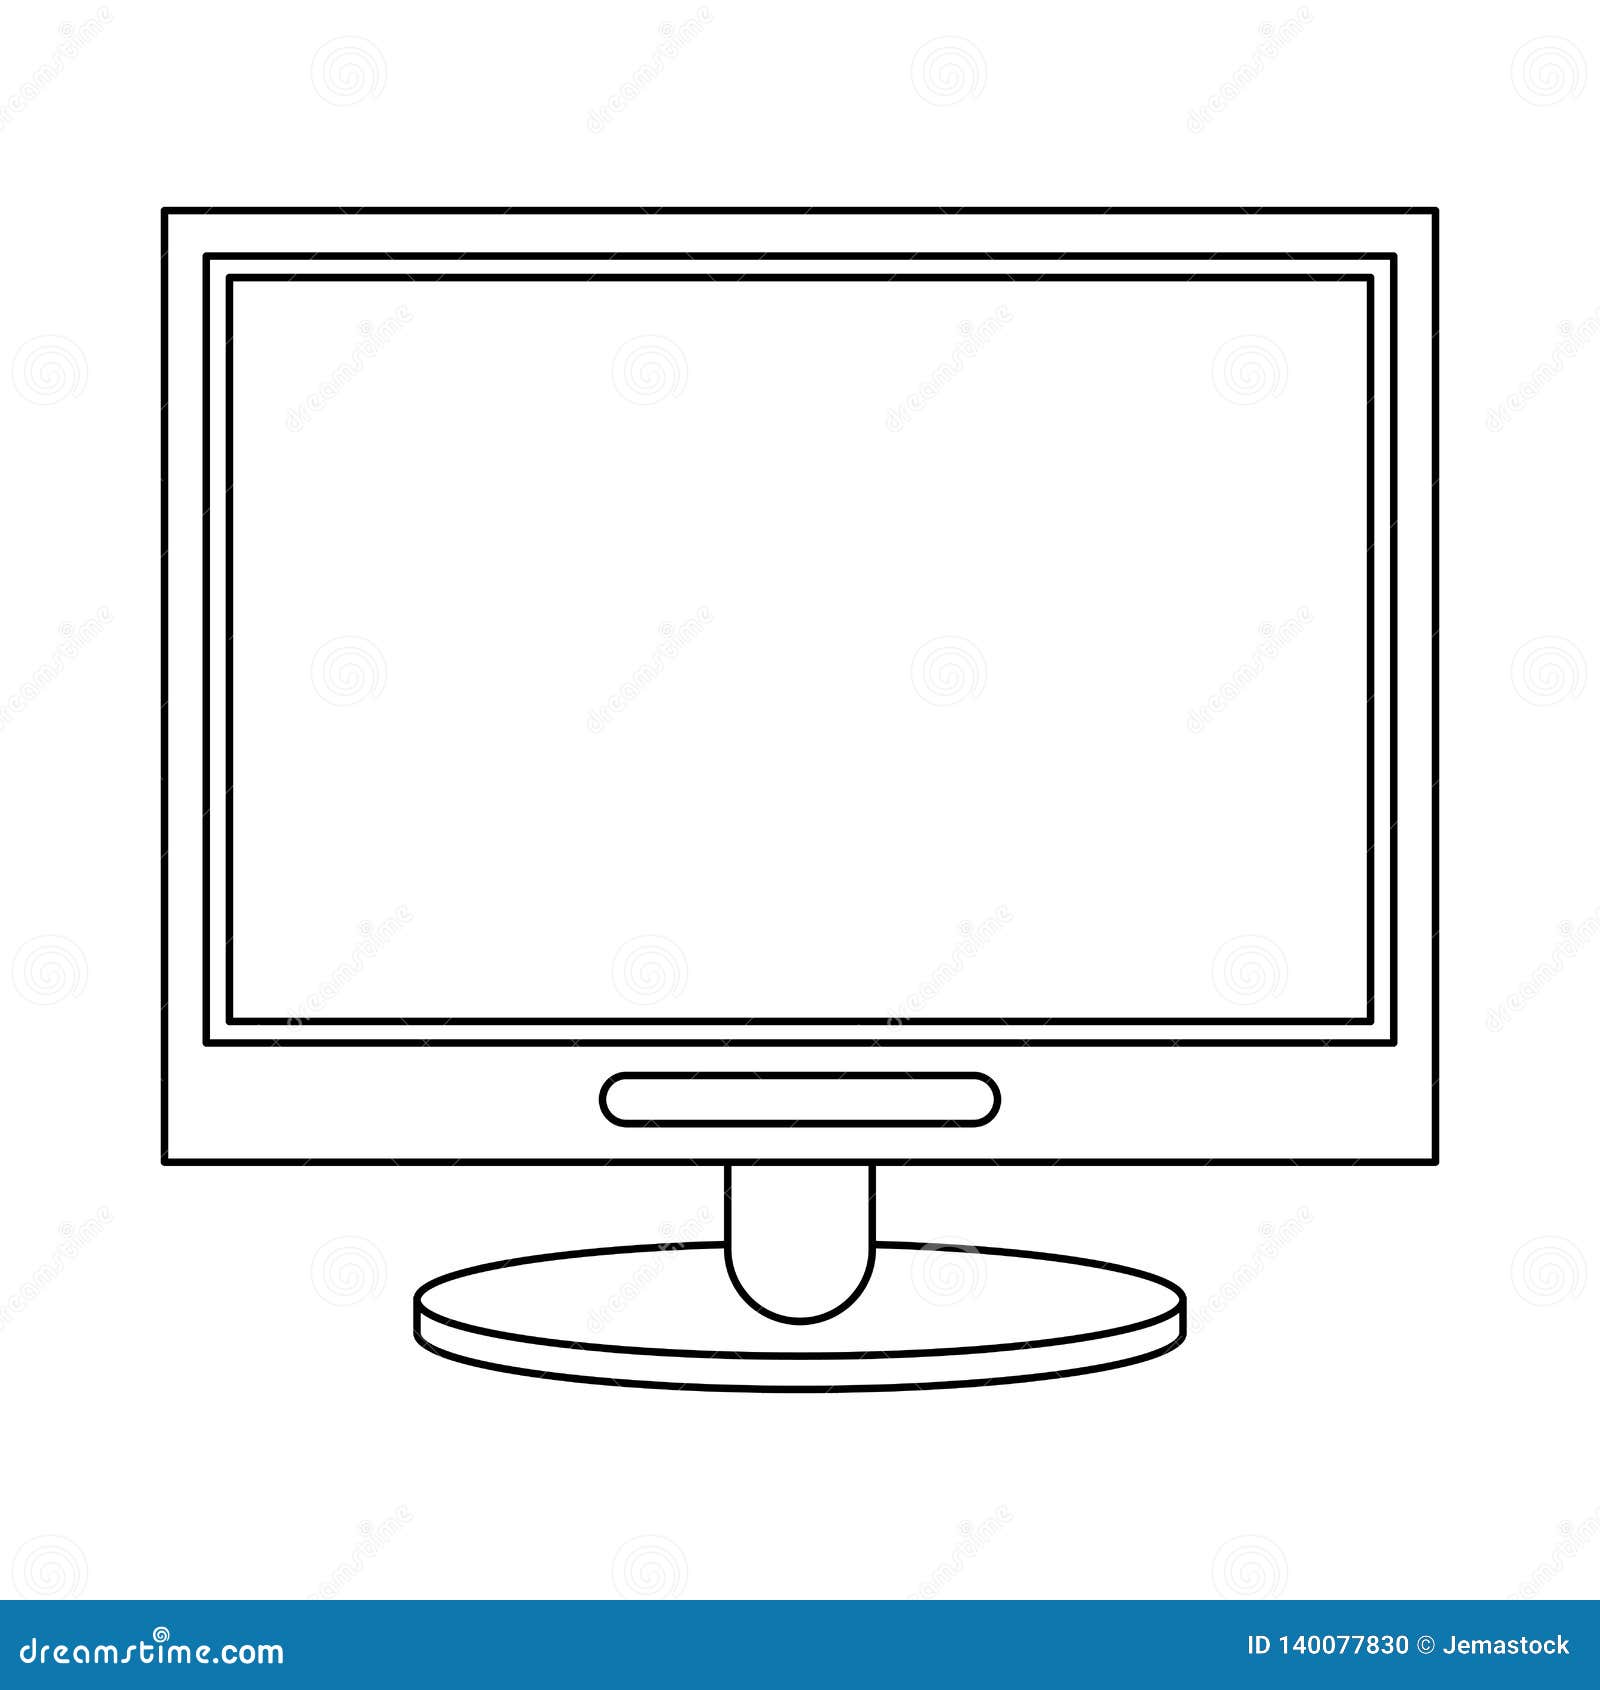 Computer Screen Hardware Technology Black and White Stock Vector ...